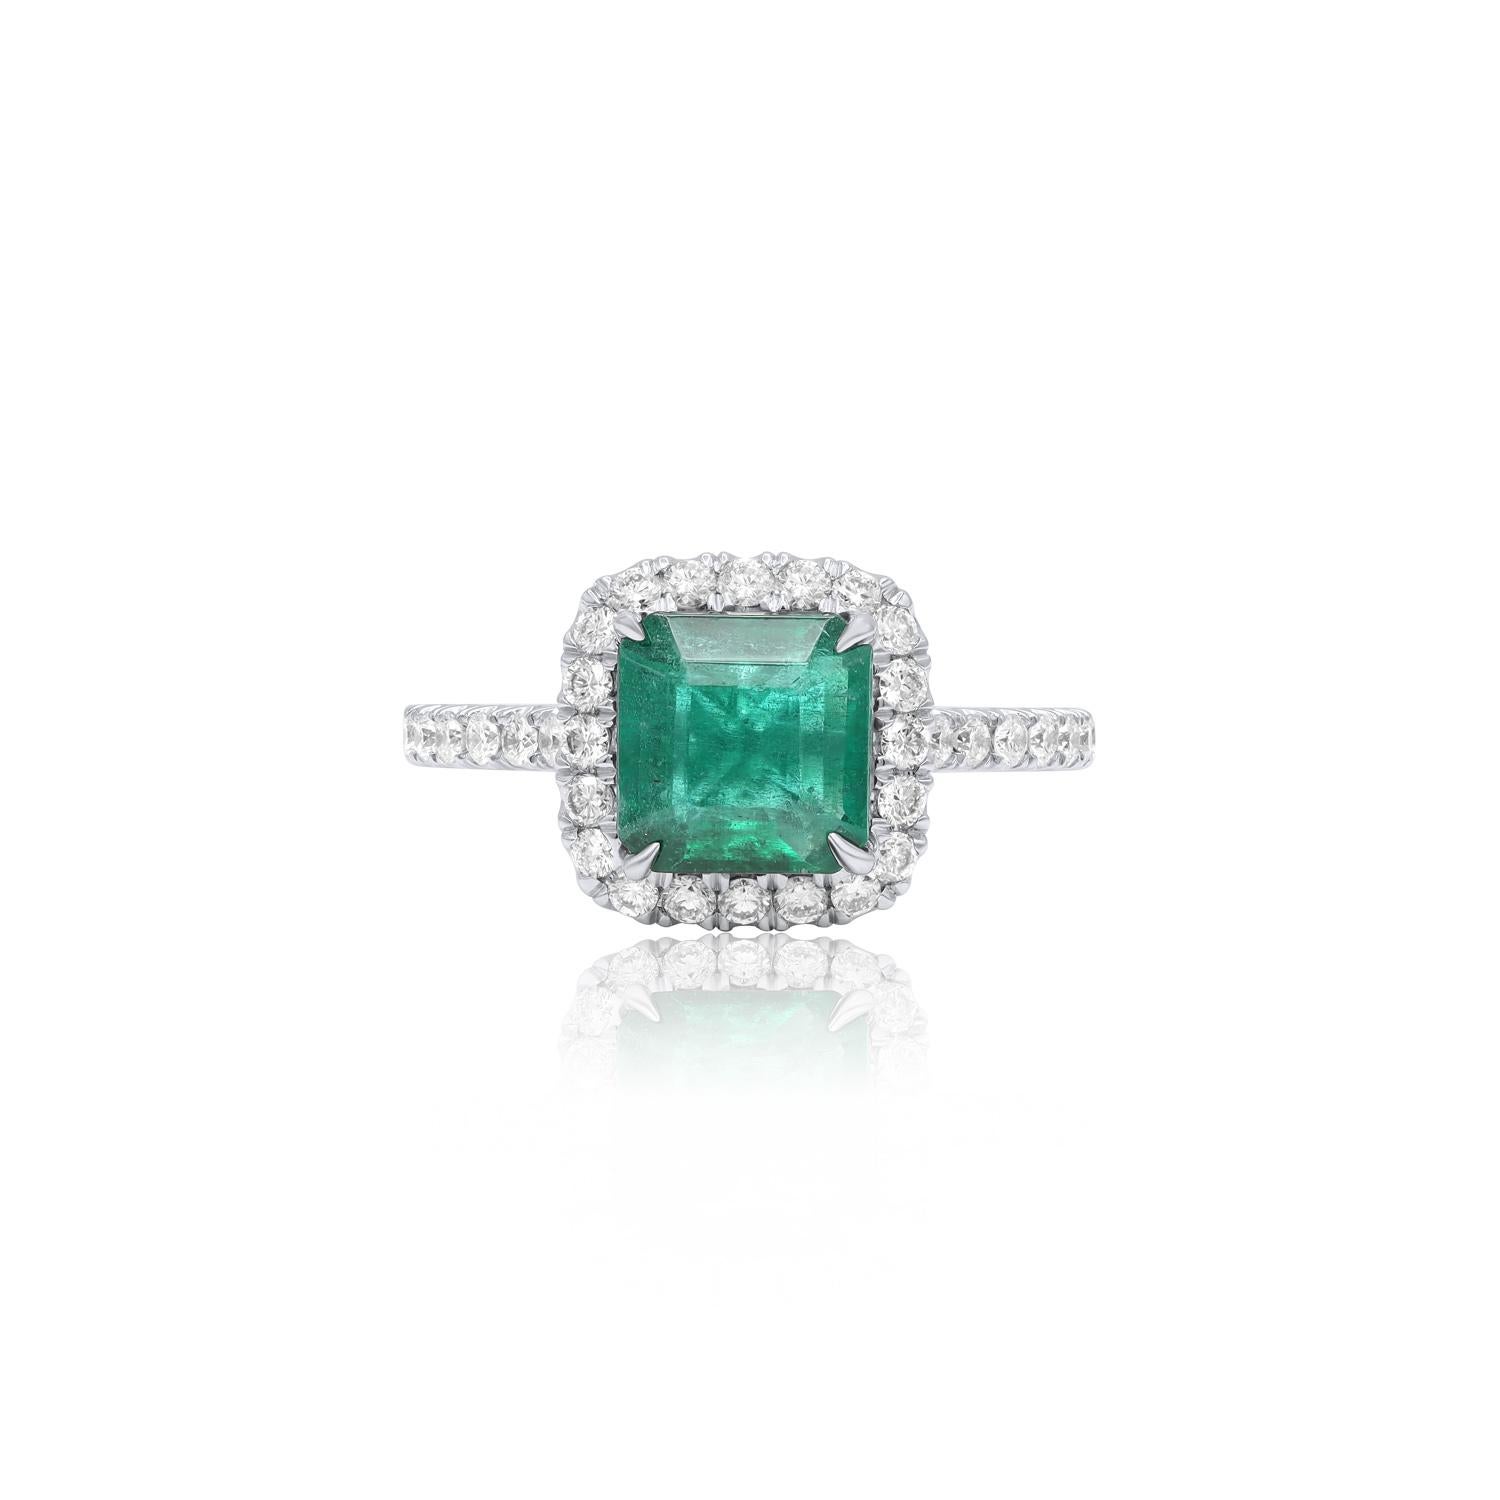 Platinum emerald diamond ring featuring a 2.00 ct cushion cut emerald with 0.80 cts tw of micropave round diamonds.
Diana M. is a leading supplier of top-quality fine jewelry for over 35 years.
Diana M is one-stop shop for all your jewelry shopping,